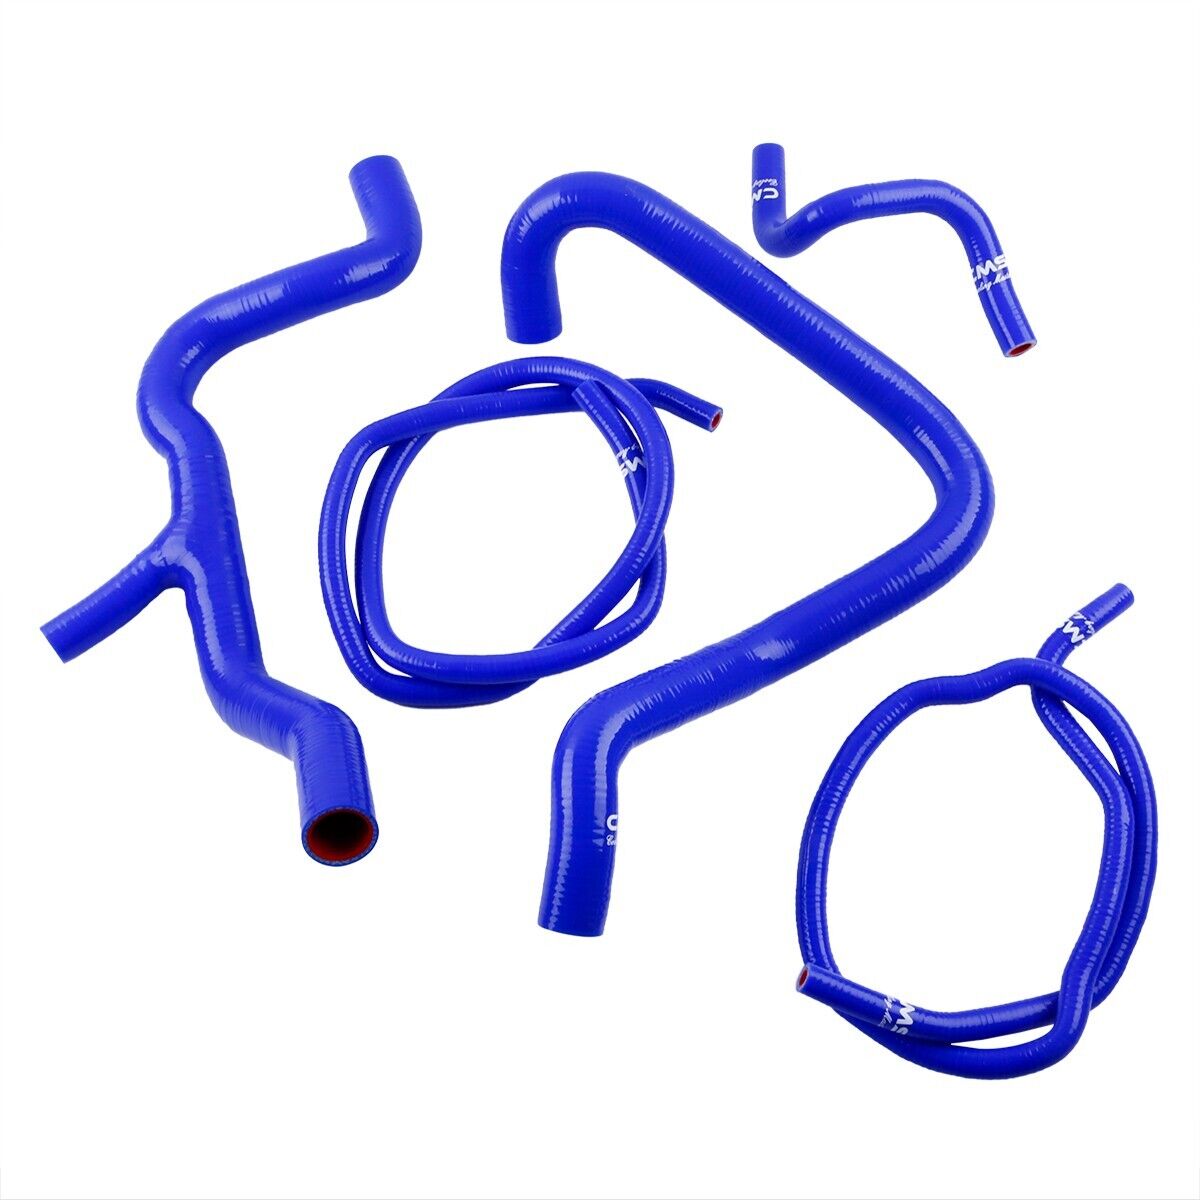 Blue For 10-2011 Ford Focus RS Mk2 ST225 2.5 Silicone Radiator Header Tank Hose